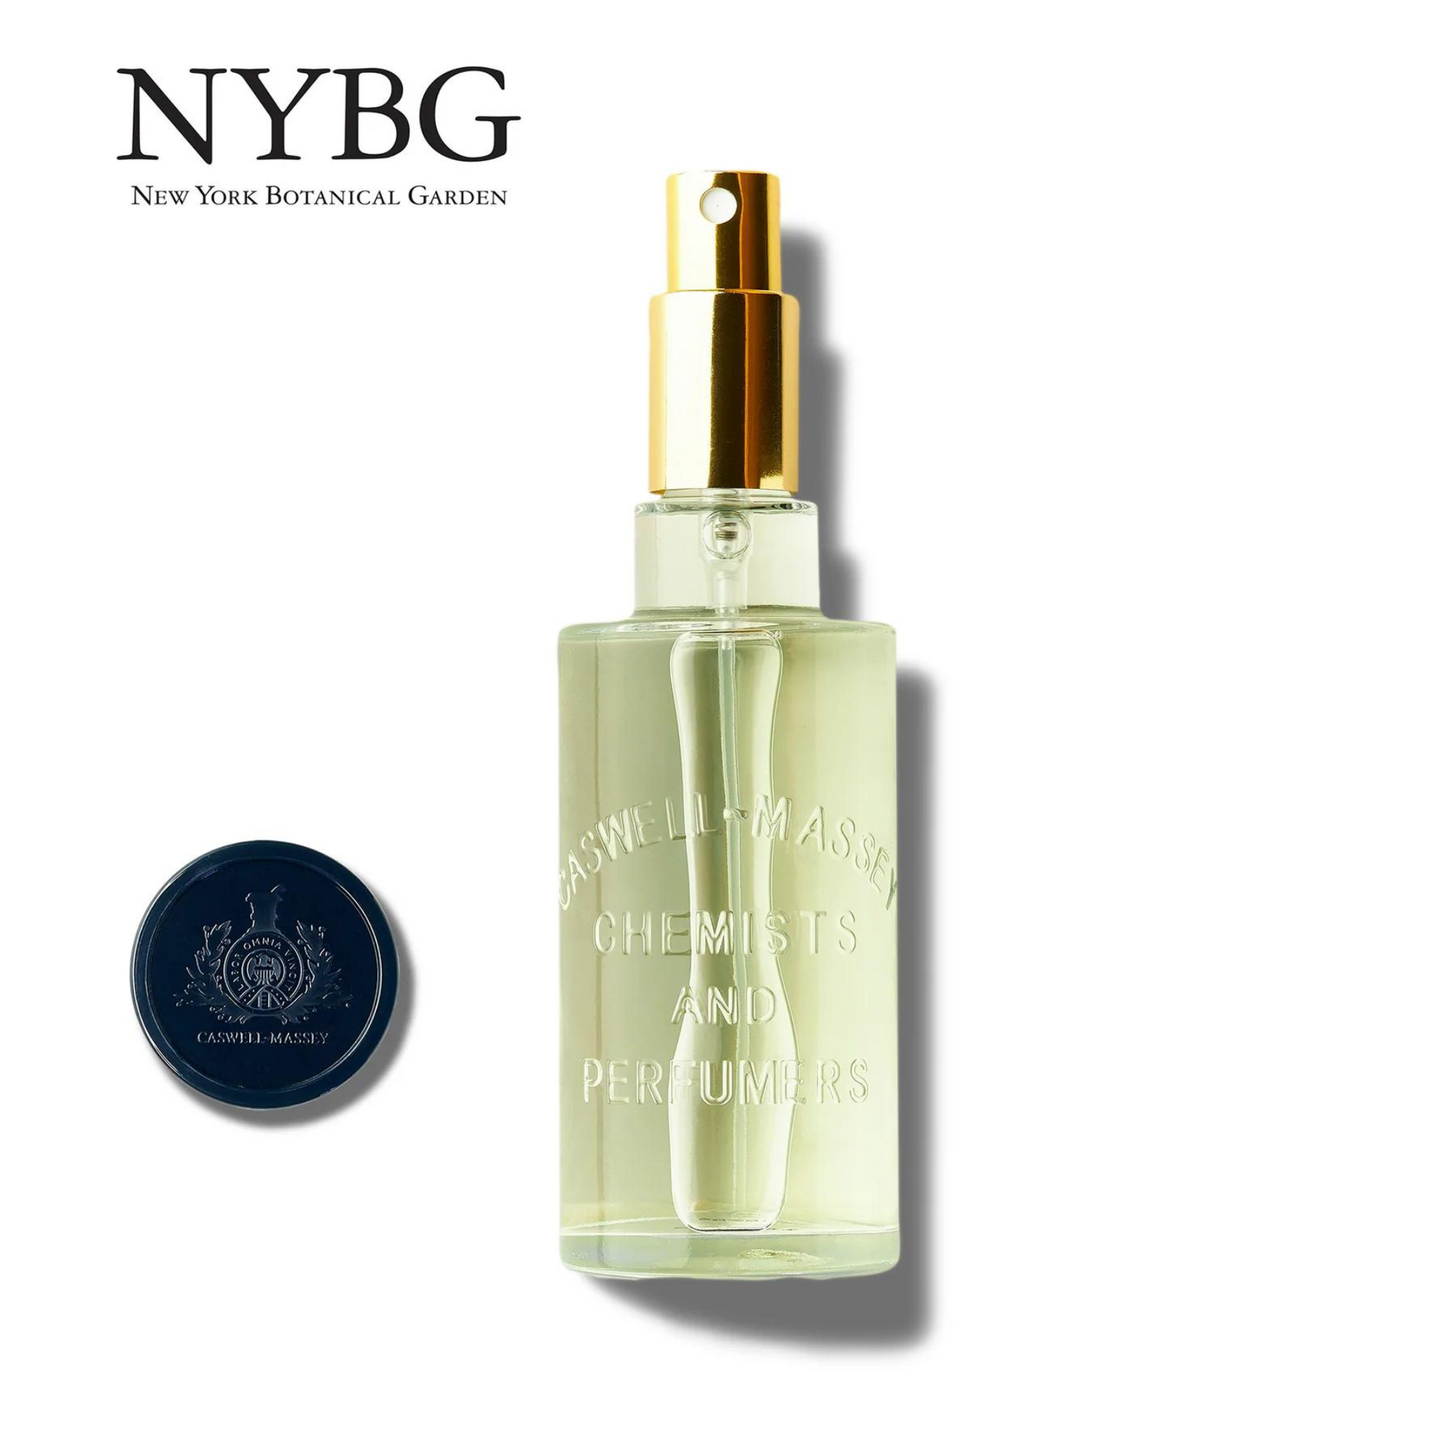 Primary Image of Caswell-Massey NYBG Ros Fragrance (3 oz)